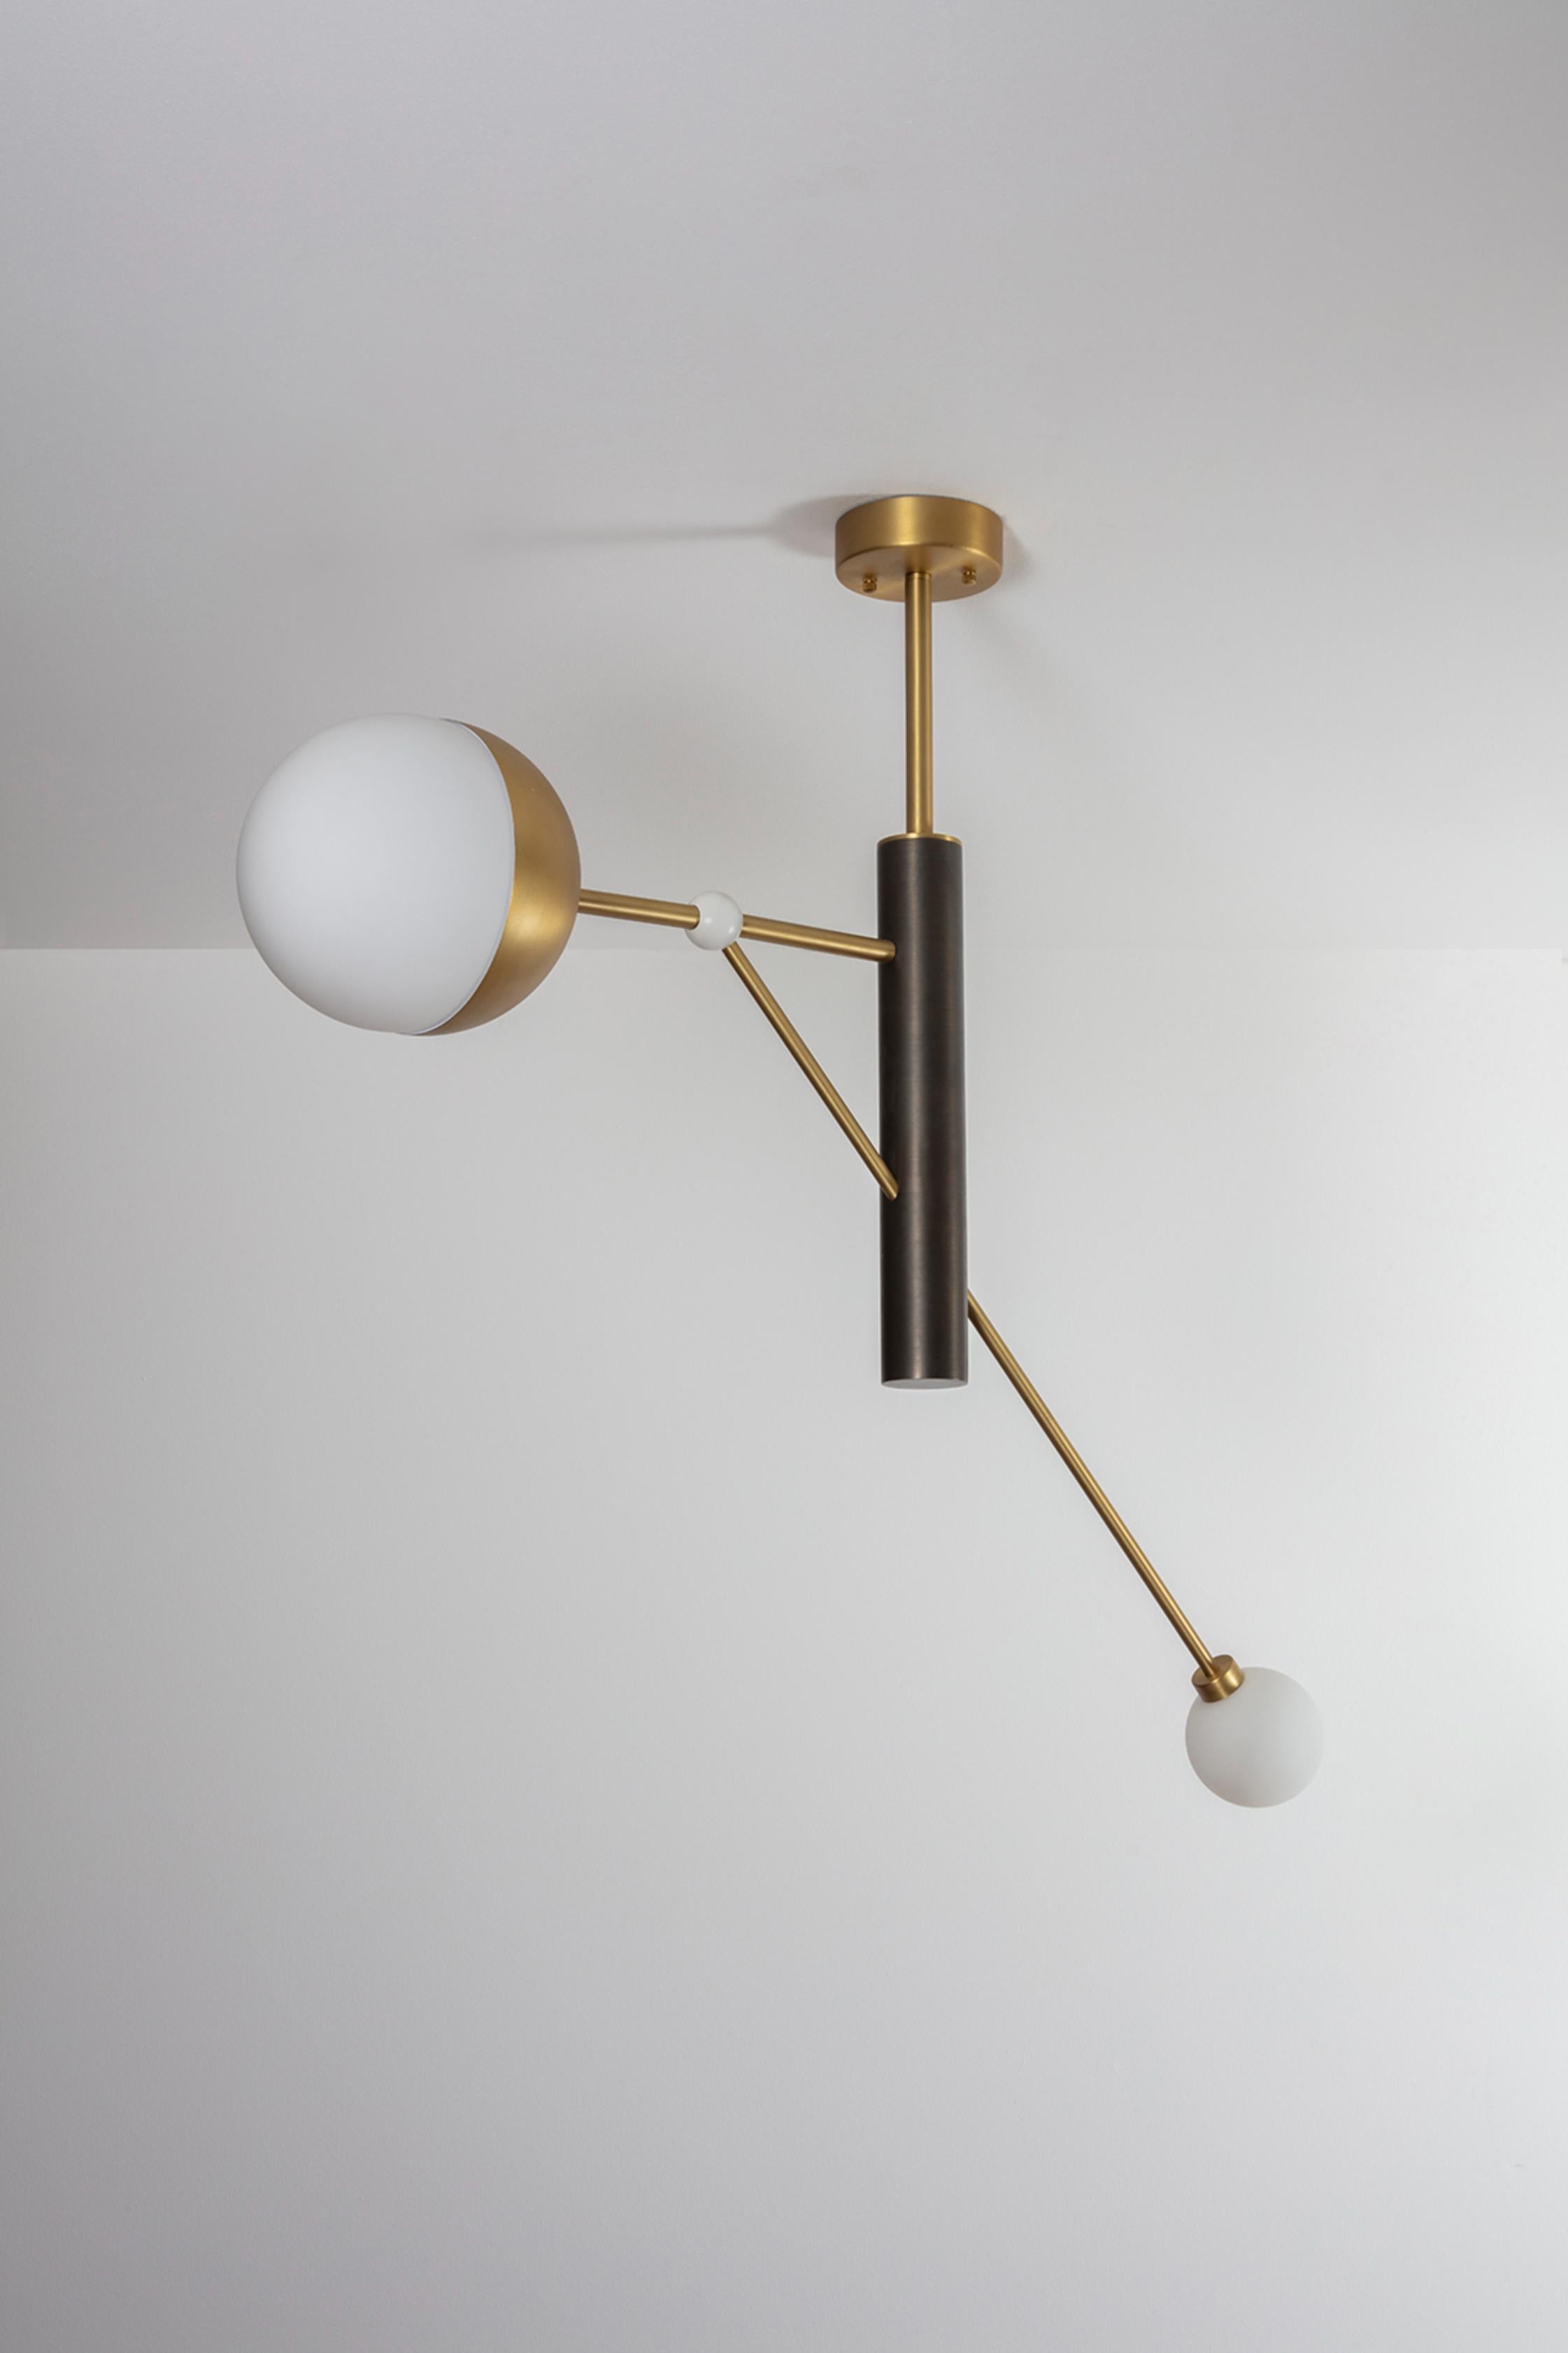 Brass Pole Dance Pendant Light by Square in Circle
Dimensions: W 87.7 x H 82 x D 20 cm.
Materials: brushed brass finish, brushed dark grey metal, white frosted glass globe.

This pendant light is inspired by Oskar Schlemmer's 1928 Pole Dance, in